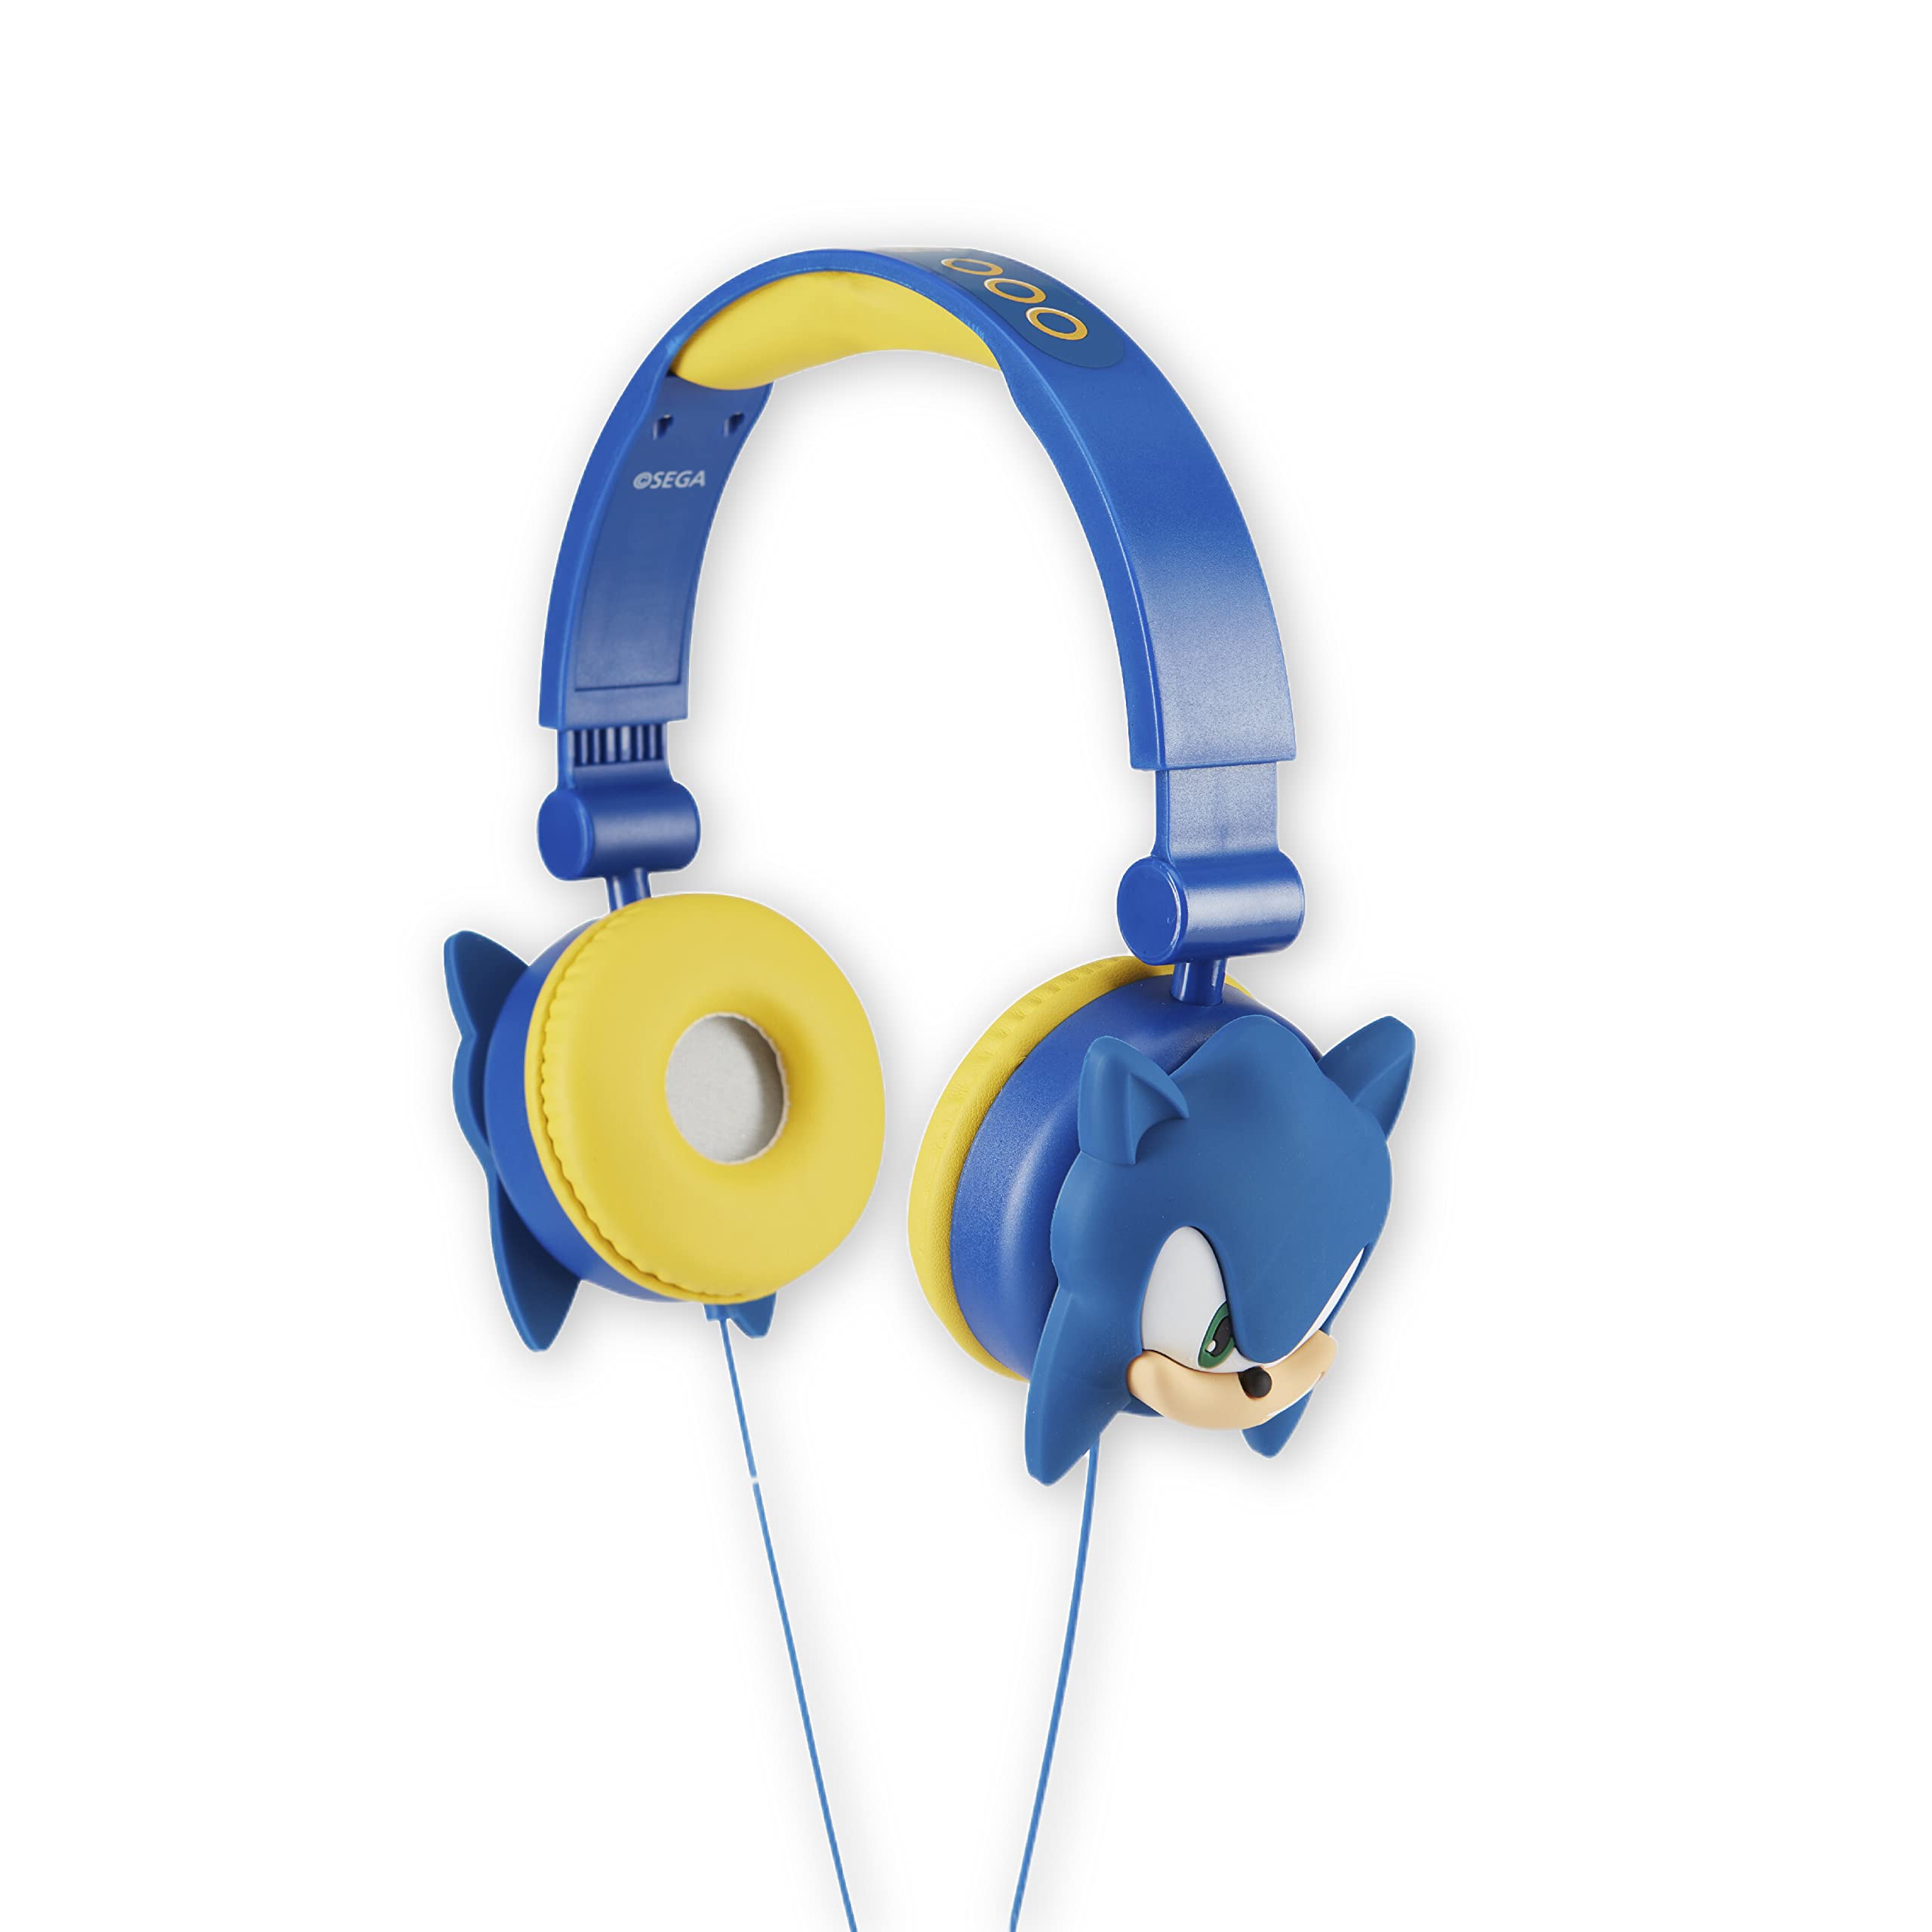 Sakar Sonic The Hedgehog Over-Ear Headphones for Kids - Adjustable Headband, Stereo Sound, Tangle-Free Cable, Volume Control, and 3.5mm Jack - Perfect for School, Home, and Travel